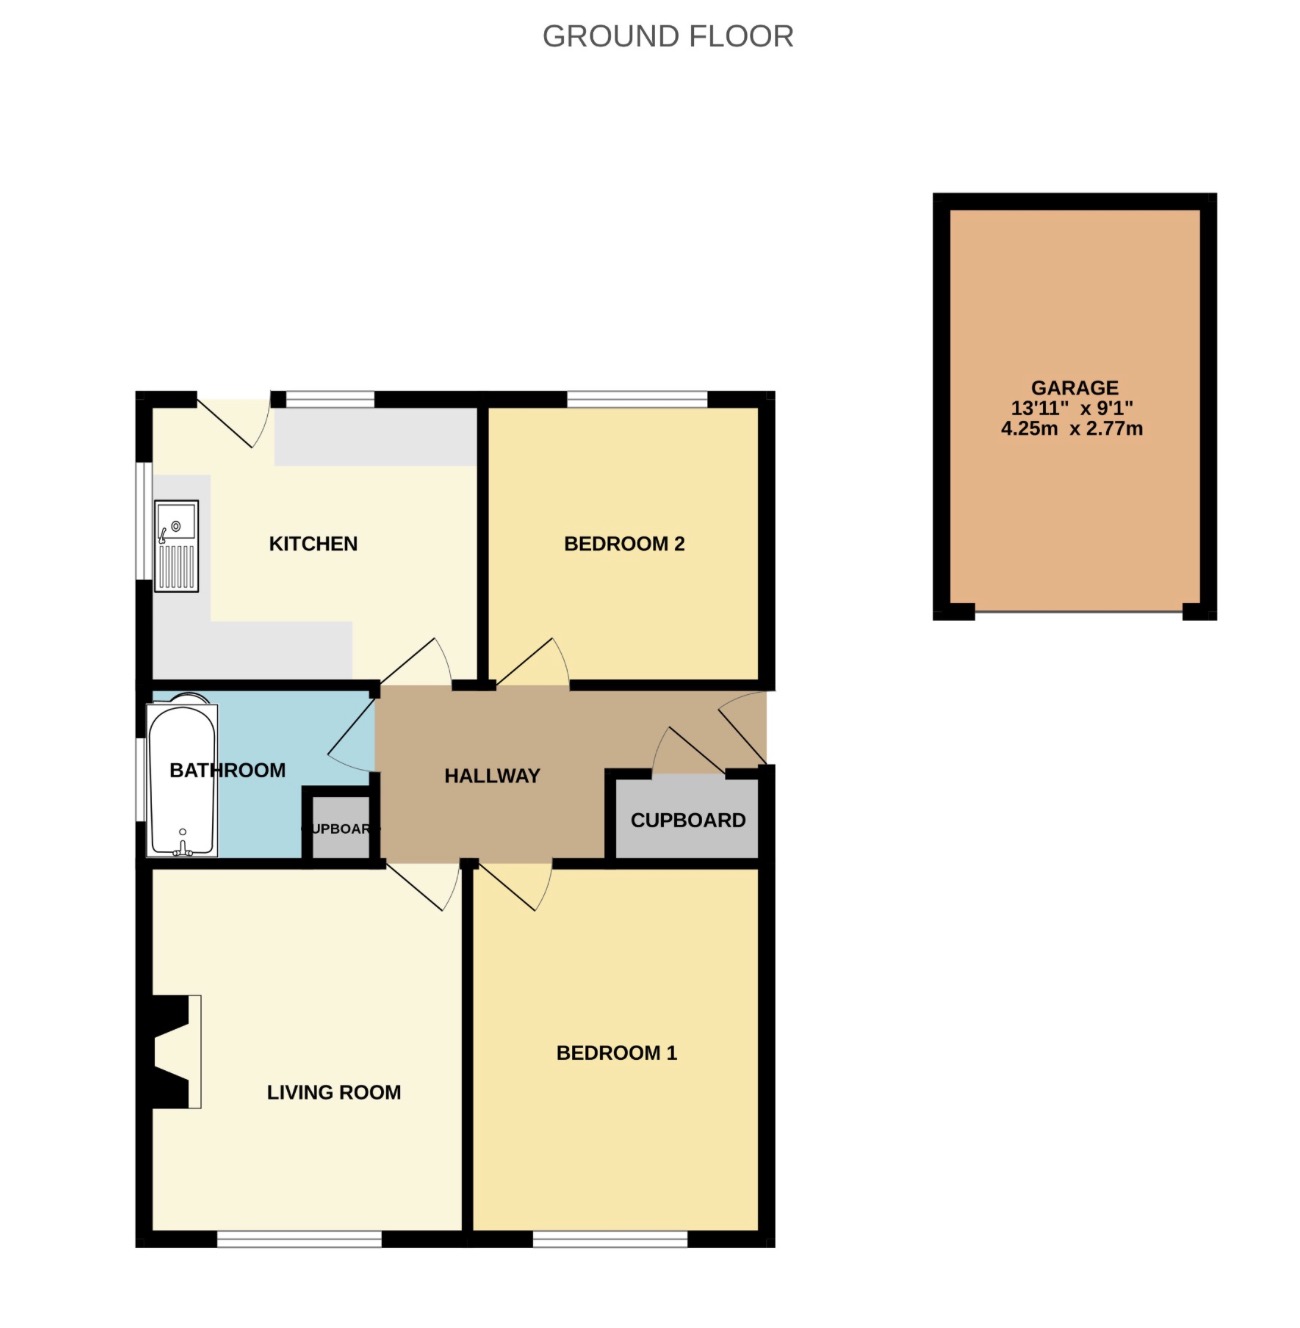 2 bed ground floor maisonette to rent in Ray Mill Road West, Maidenhead - Property floorplan